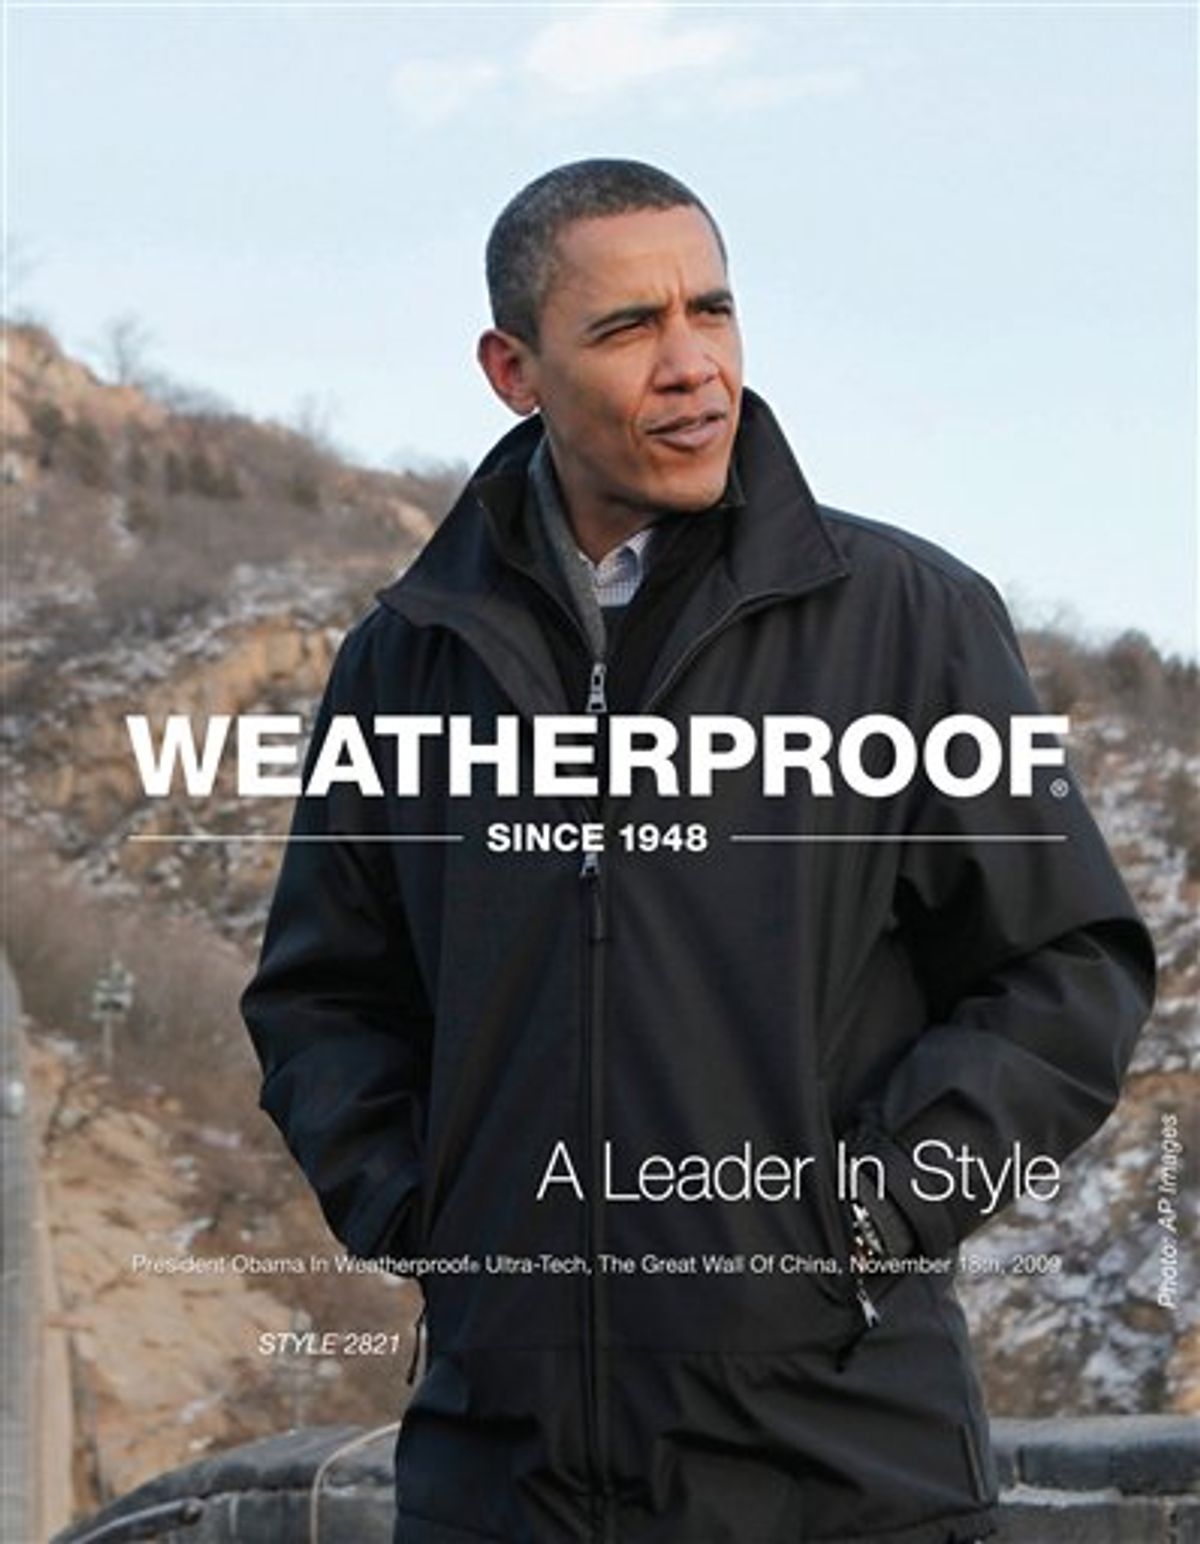 This photo released by AP Images and Weatherproof Garment Company shows President Obama wearing one of their coats while in China.(AP Photo/Weatherproof Garment Company,AP Images)**NO SALES** (AP)